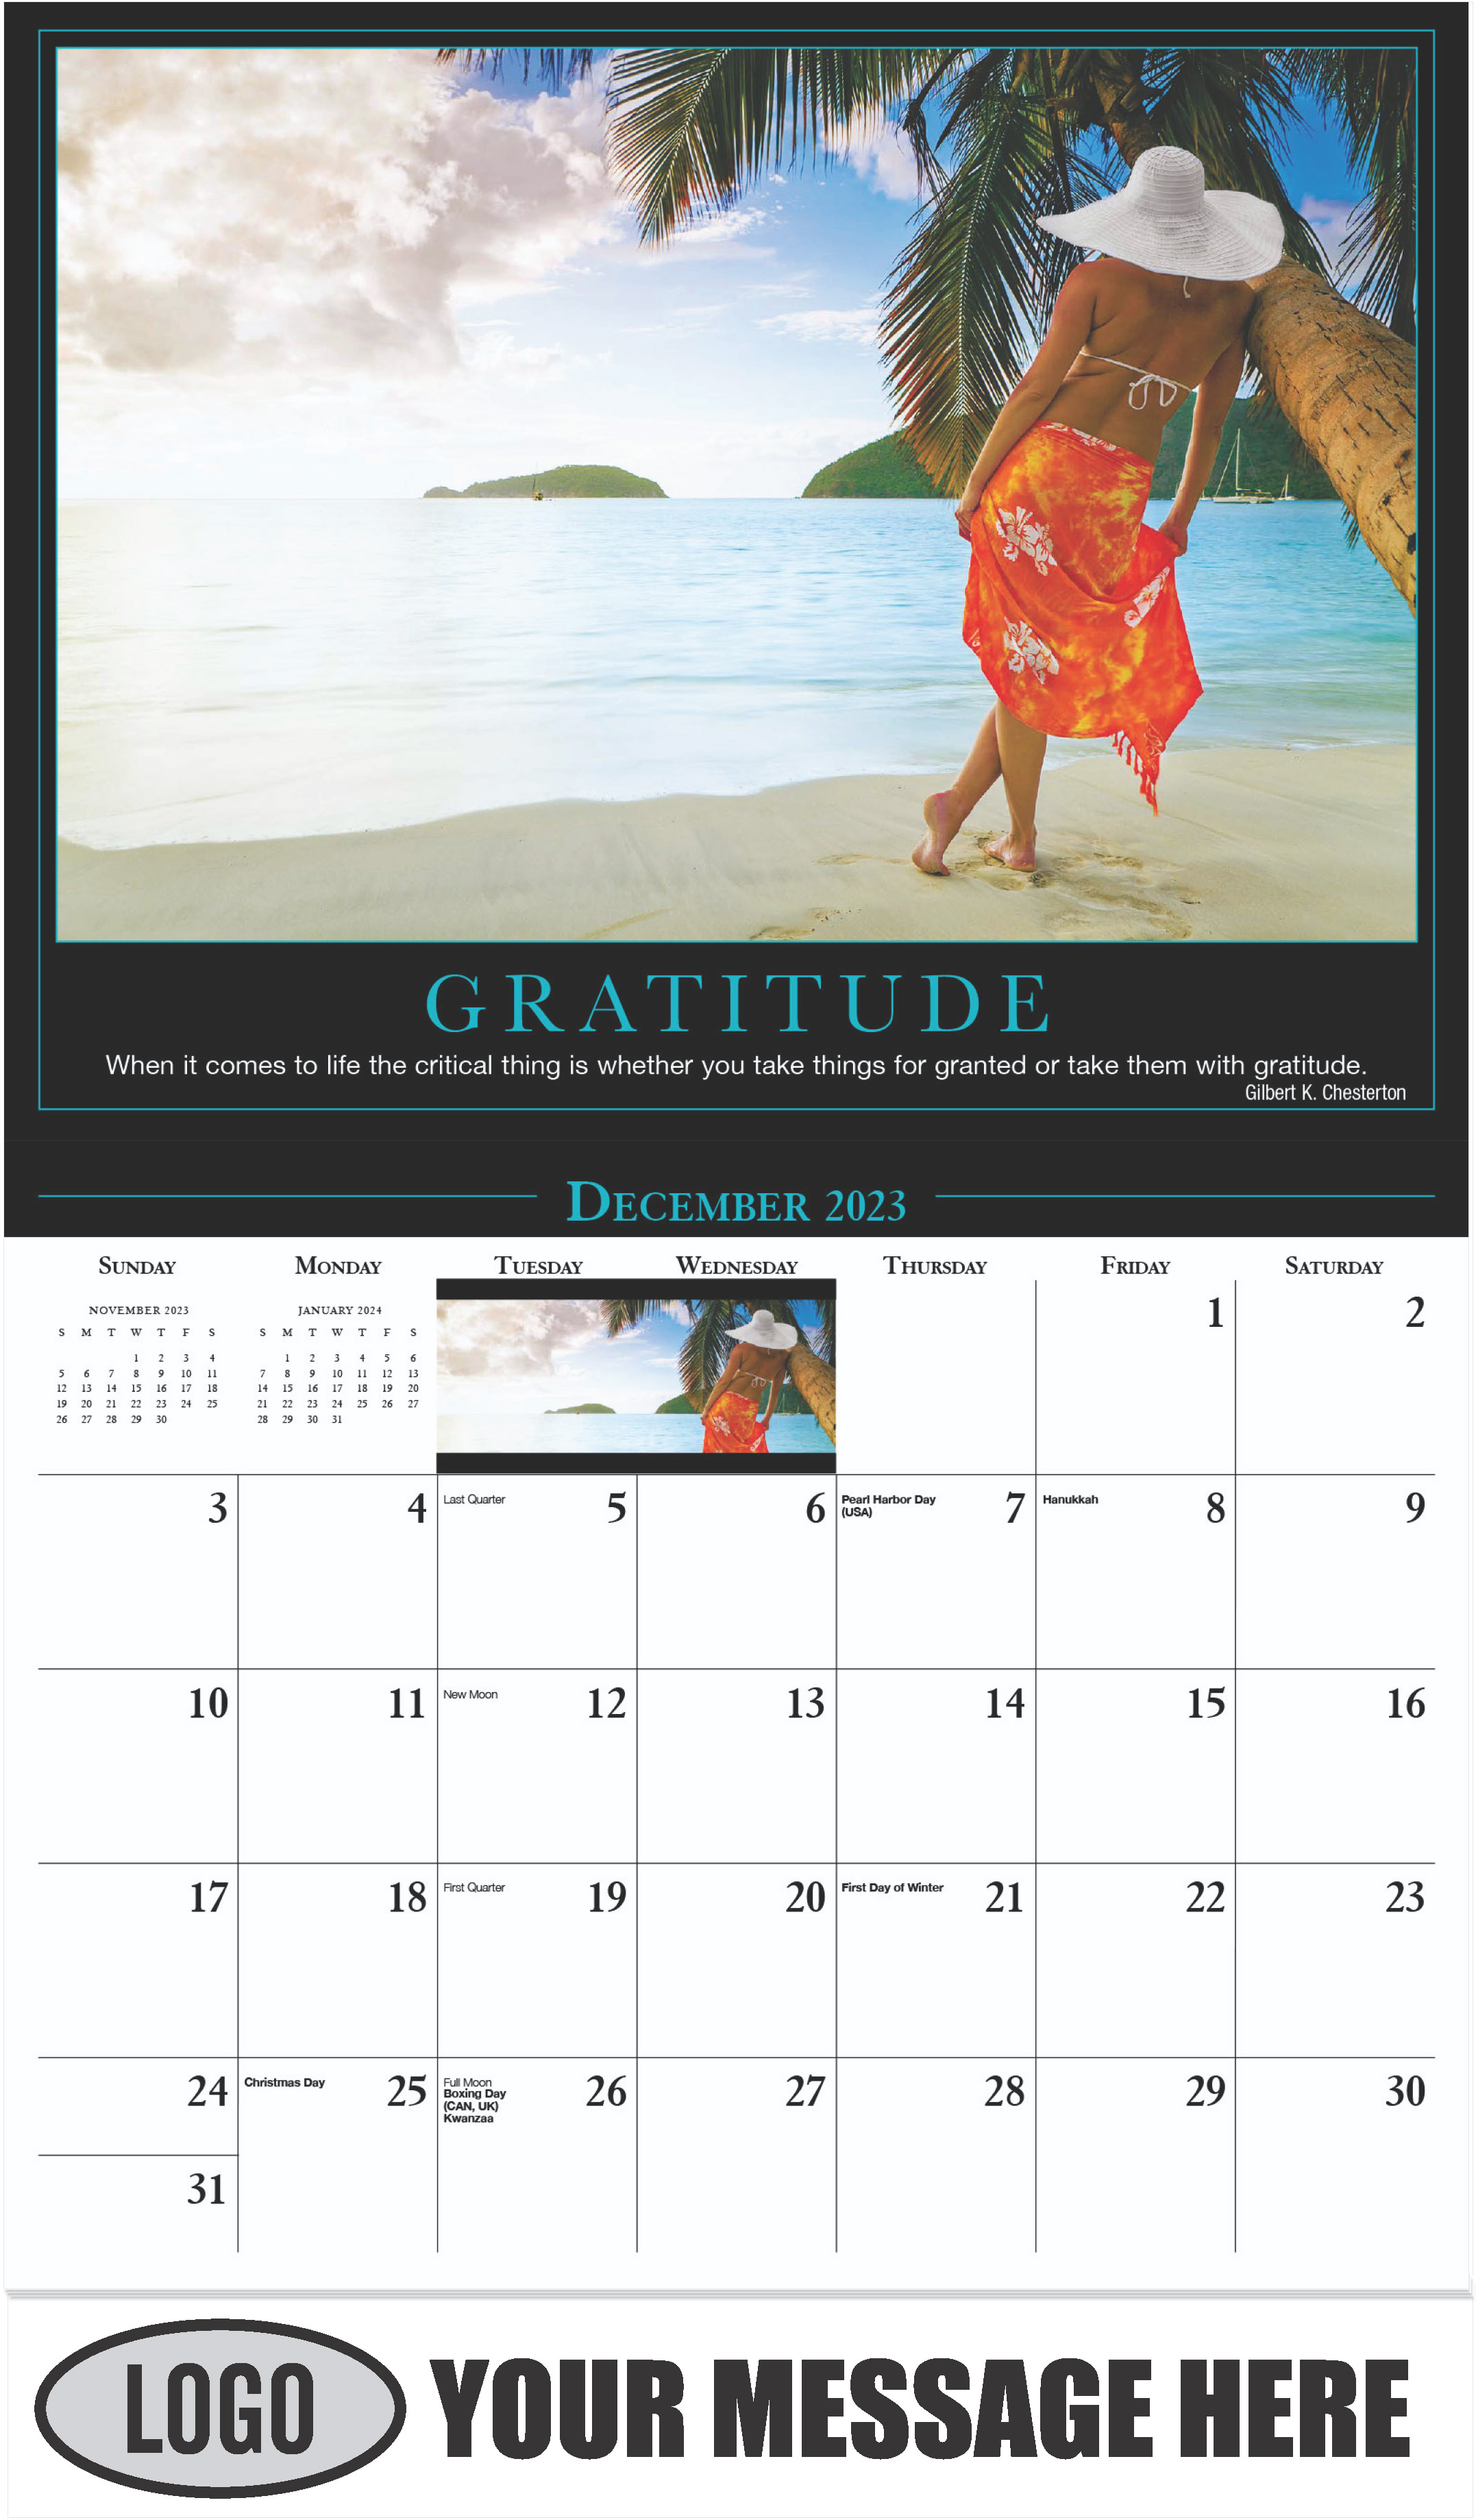 GRATITUDE ''When it comes to life the critical thing is whether you take things for granted or take them with gratitude.'' - Gilbert K. Chesterton - December 2023 - Motivation 2023 Promotional Calendar